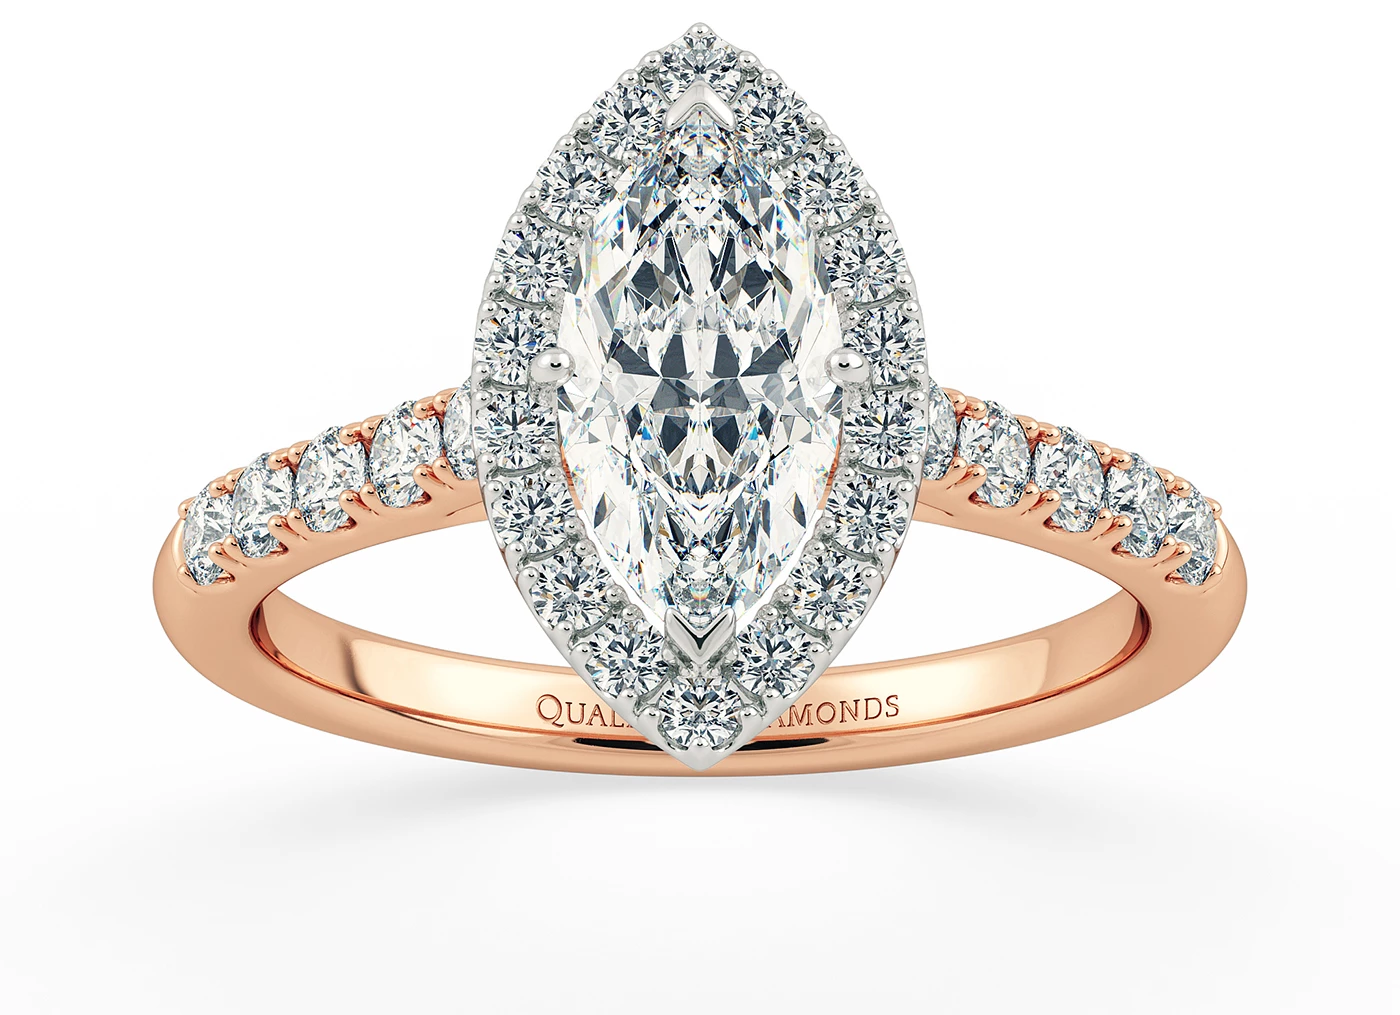 Two Carat Halo Marquise Diamond Ring in 18K Rose Gold